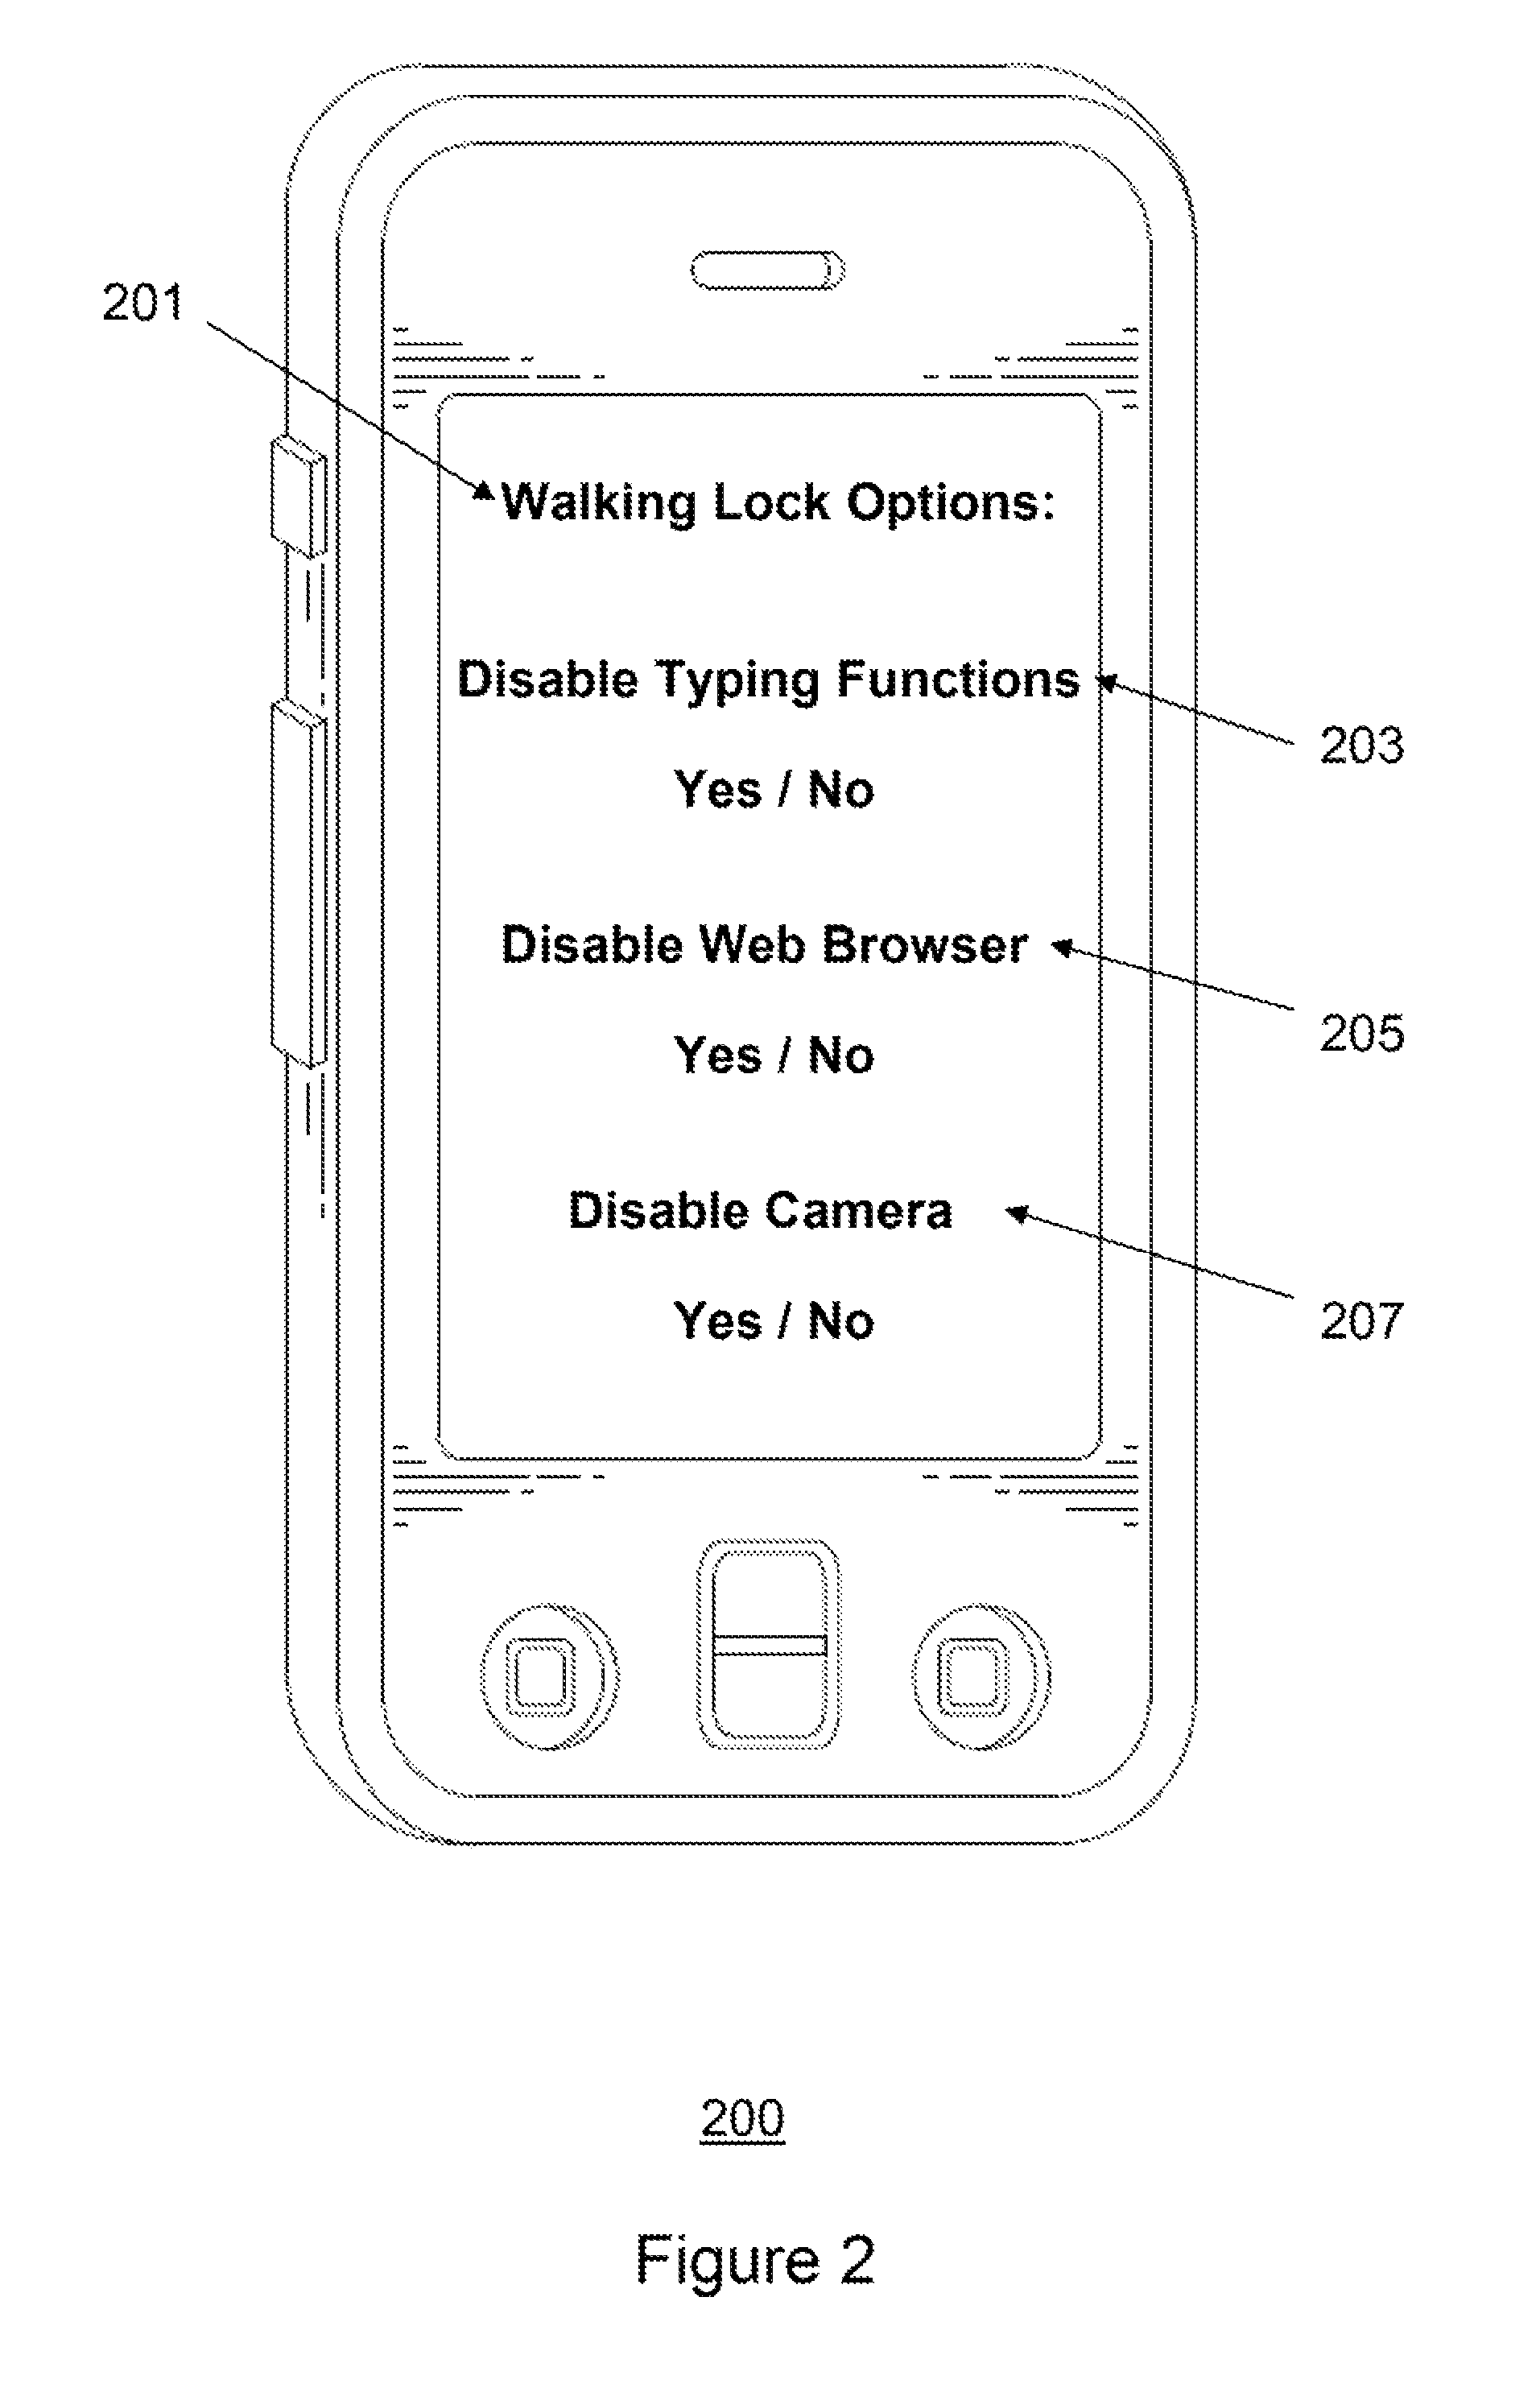 Apparatus and method for preventing a dangerous user behavior with a mobile communication device using an integrated pedometer